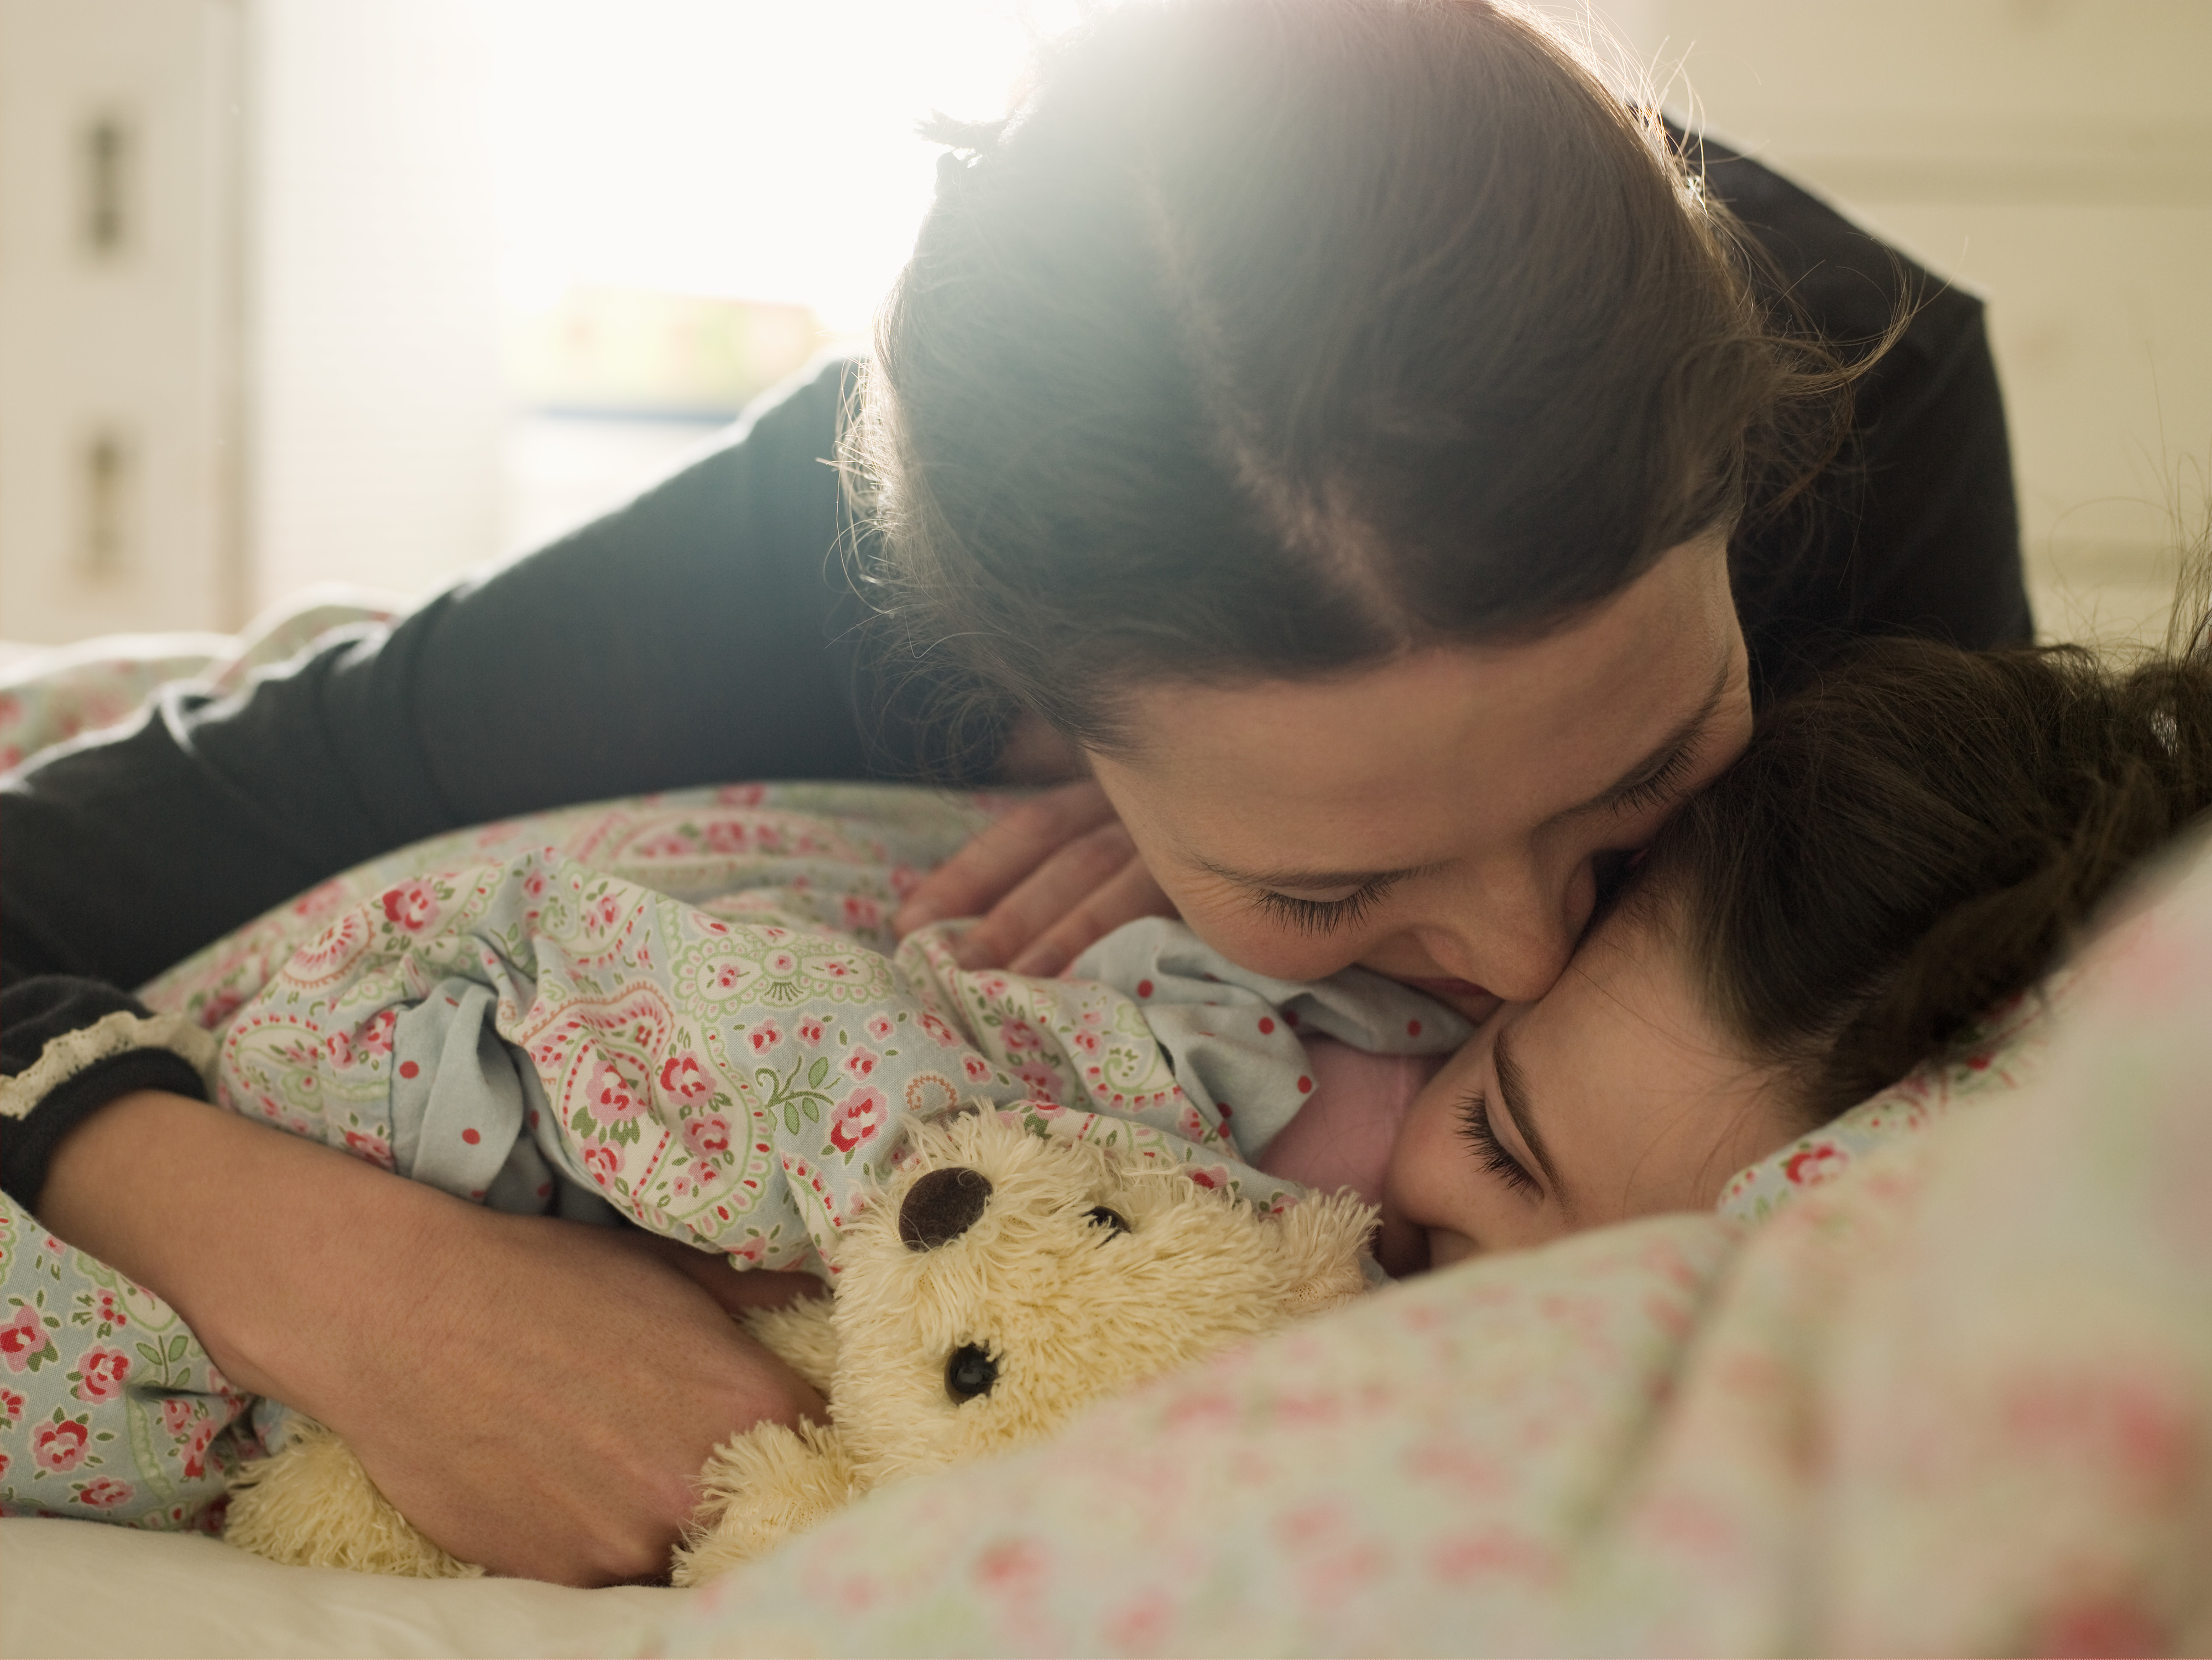 Woman and child embracing in bed with a teddy bear, sharing a tender moment